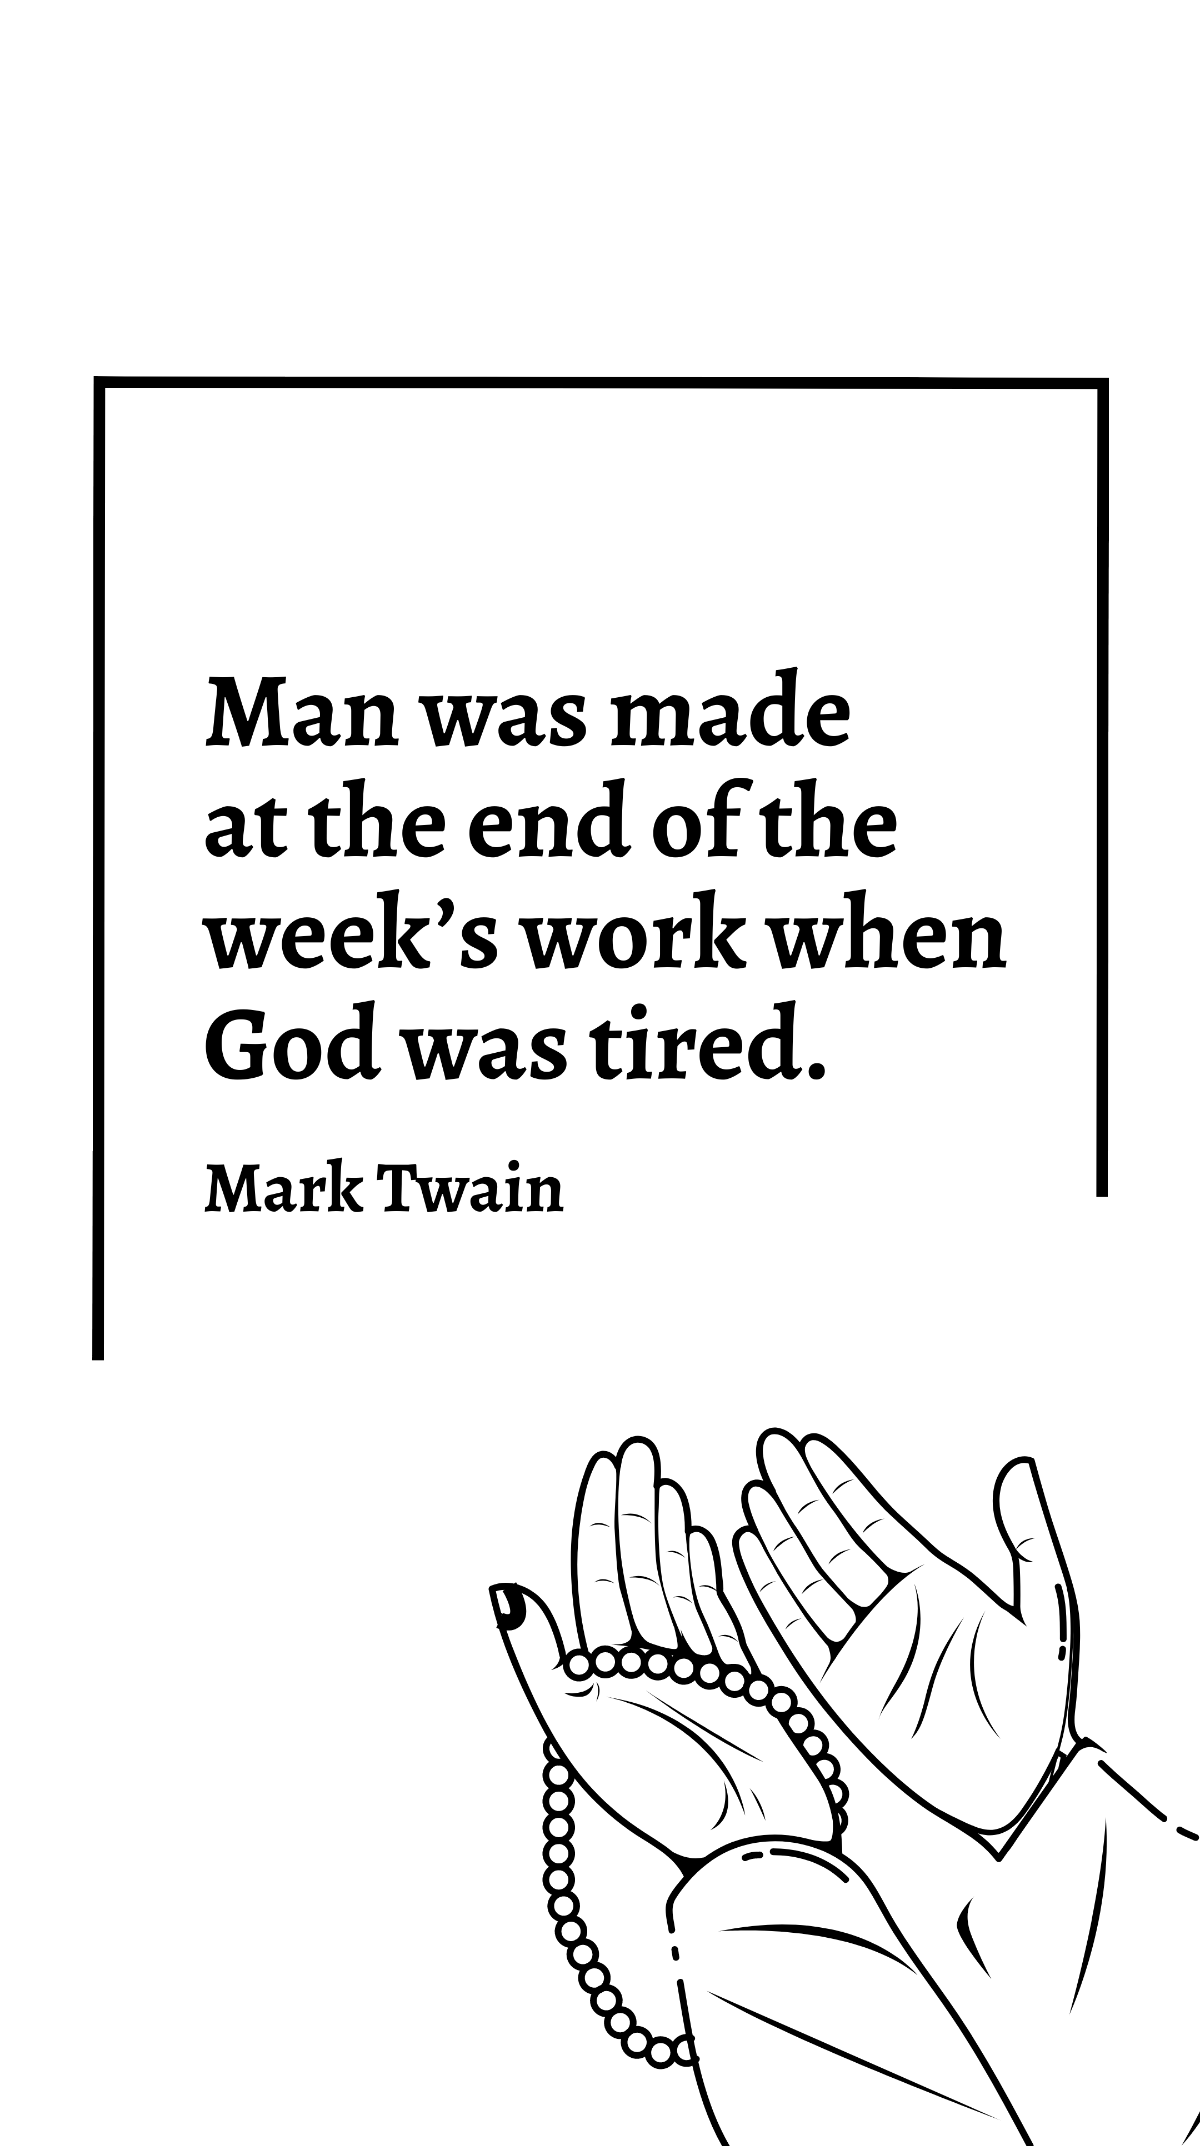 Free Mark Twain - Man was made at the end of the week’s work when God was tired.  Template